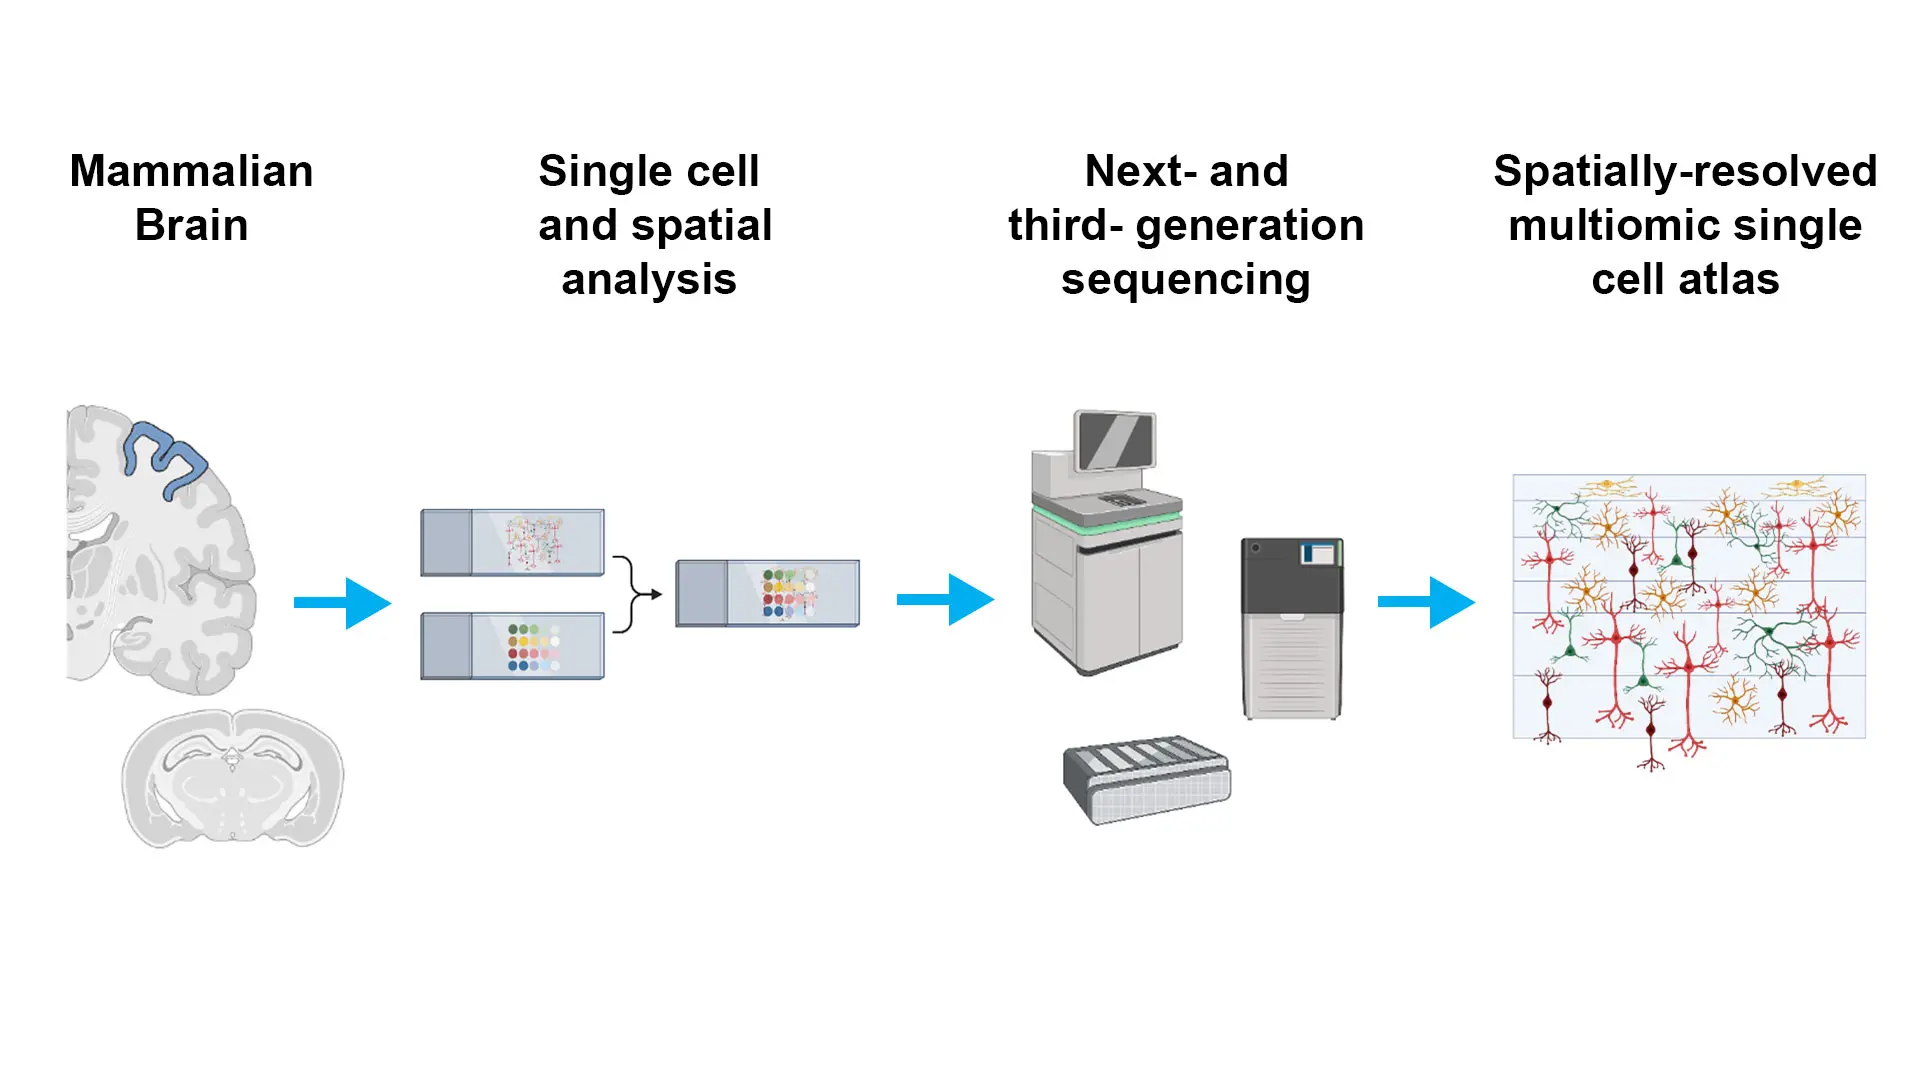 Figure 1. The combination of next-generation sequencing and single-cell analyses is revolutionizing our ability to perform multiomic profiling with single-cell spatial resolution, providing an unprecedented level of insight into the complex biology of the mammalian (especially human) brain. These technologies hold enormous promise for advancing our understanding of human health and disease, and they are likely to continue to be a driving force in neuroscience research for years to come.